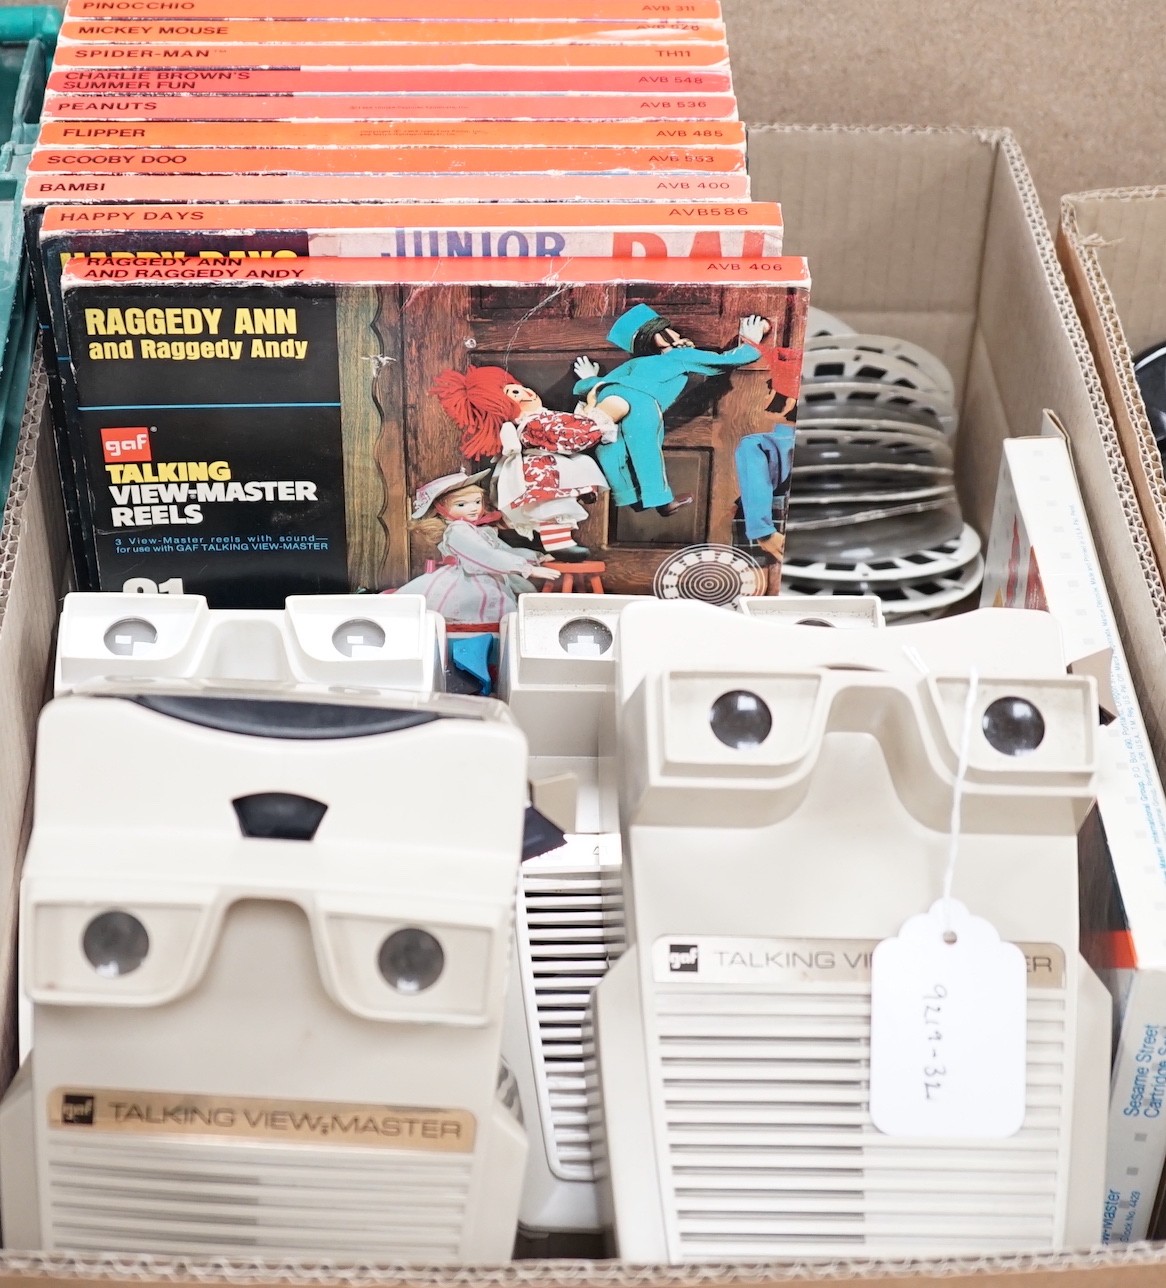 Four Talking View-Master stereo viewers and ten sets of Talking View-Master reels or cartridges